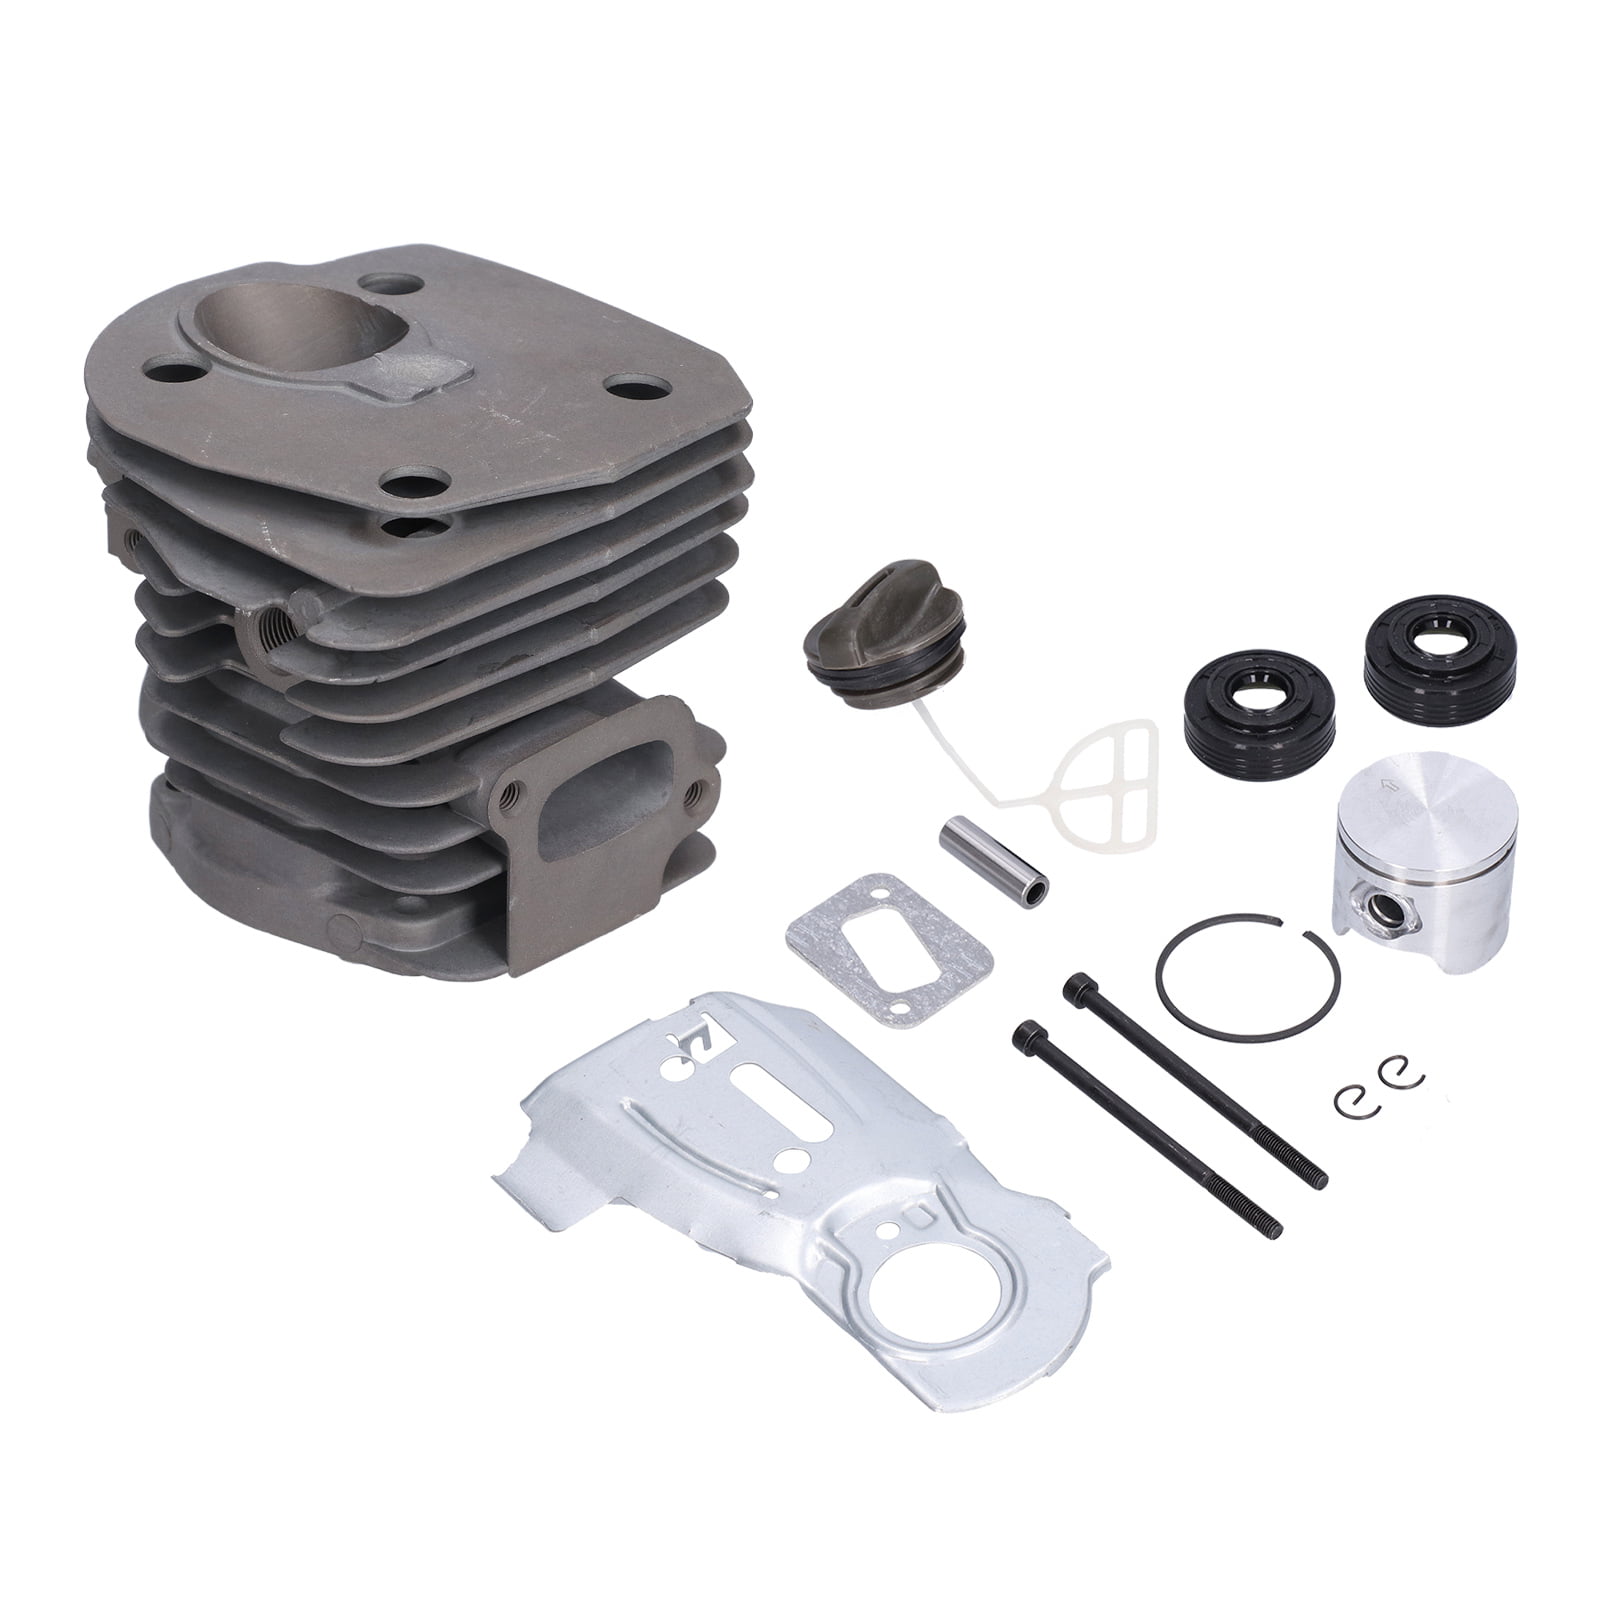 Zerodis 44mm Cylinder Piston Oil Top End Rebuild Kit 503869971 Replacement  For 340 345 350 Chain Saw,503932302